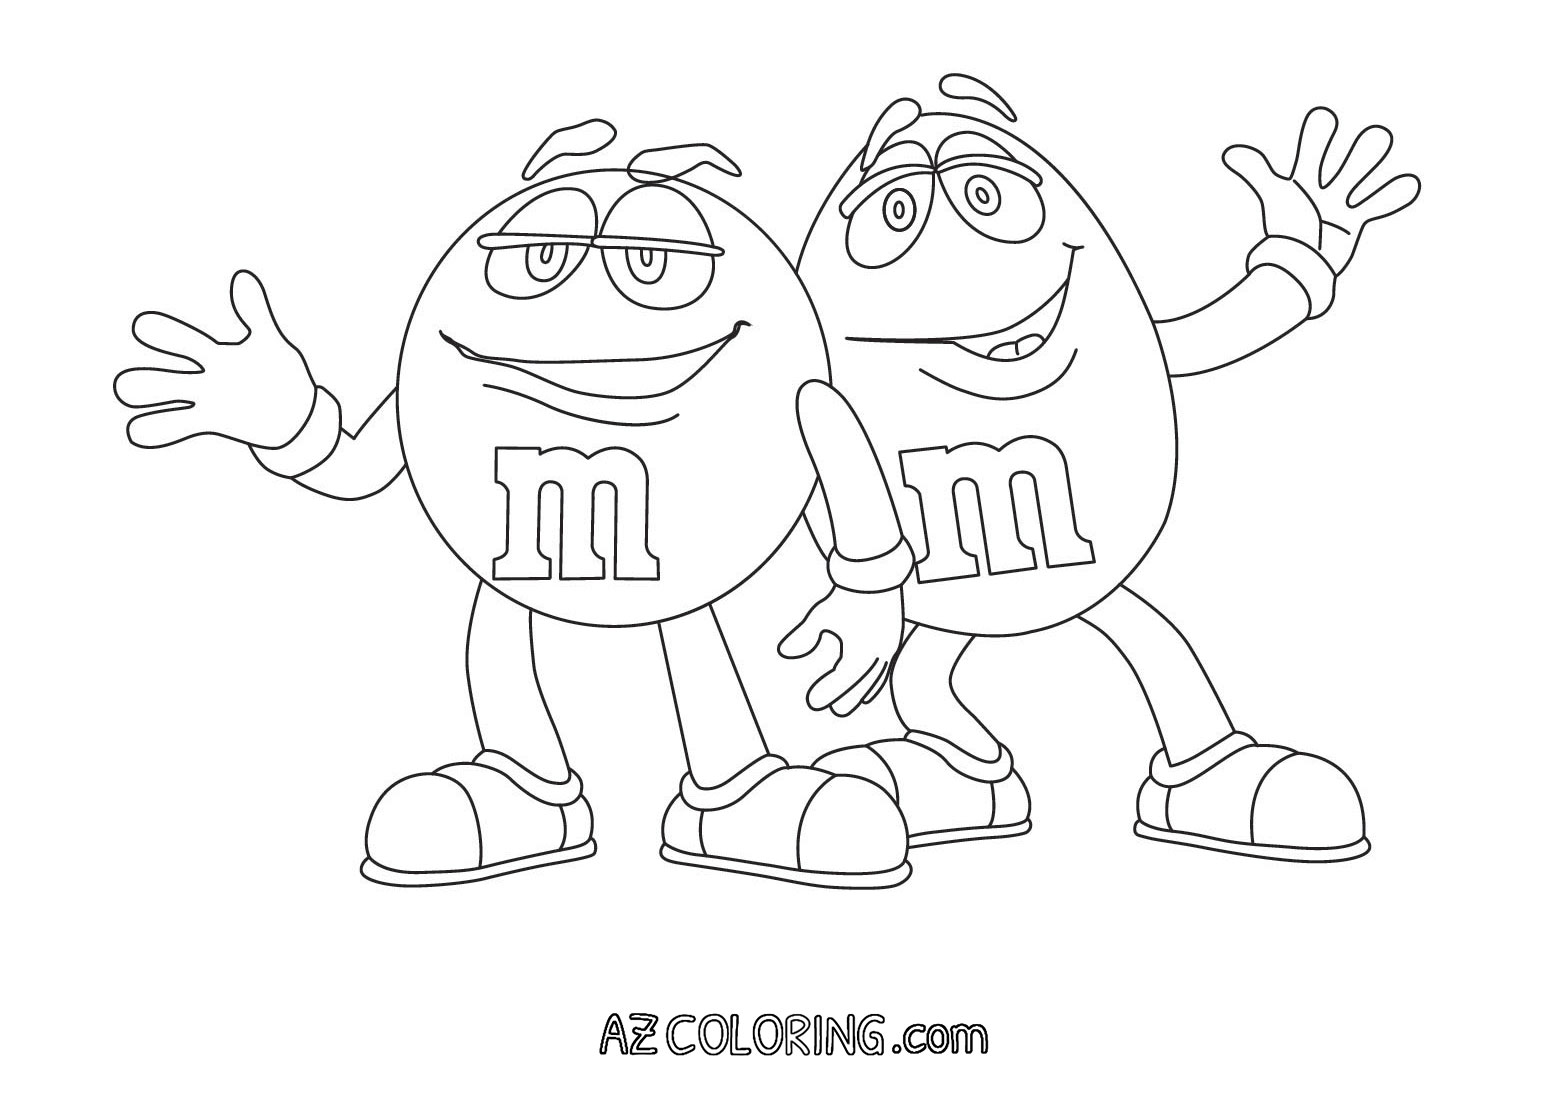 M&m Coloring Page - Coloring Home